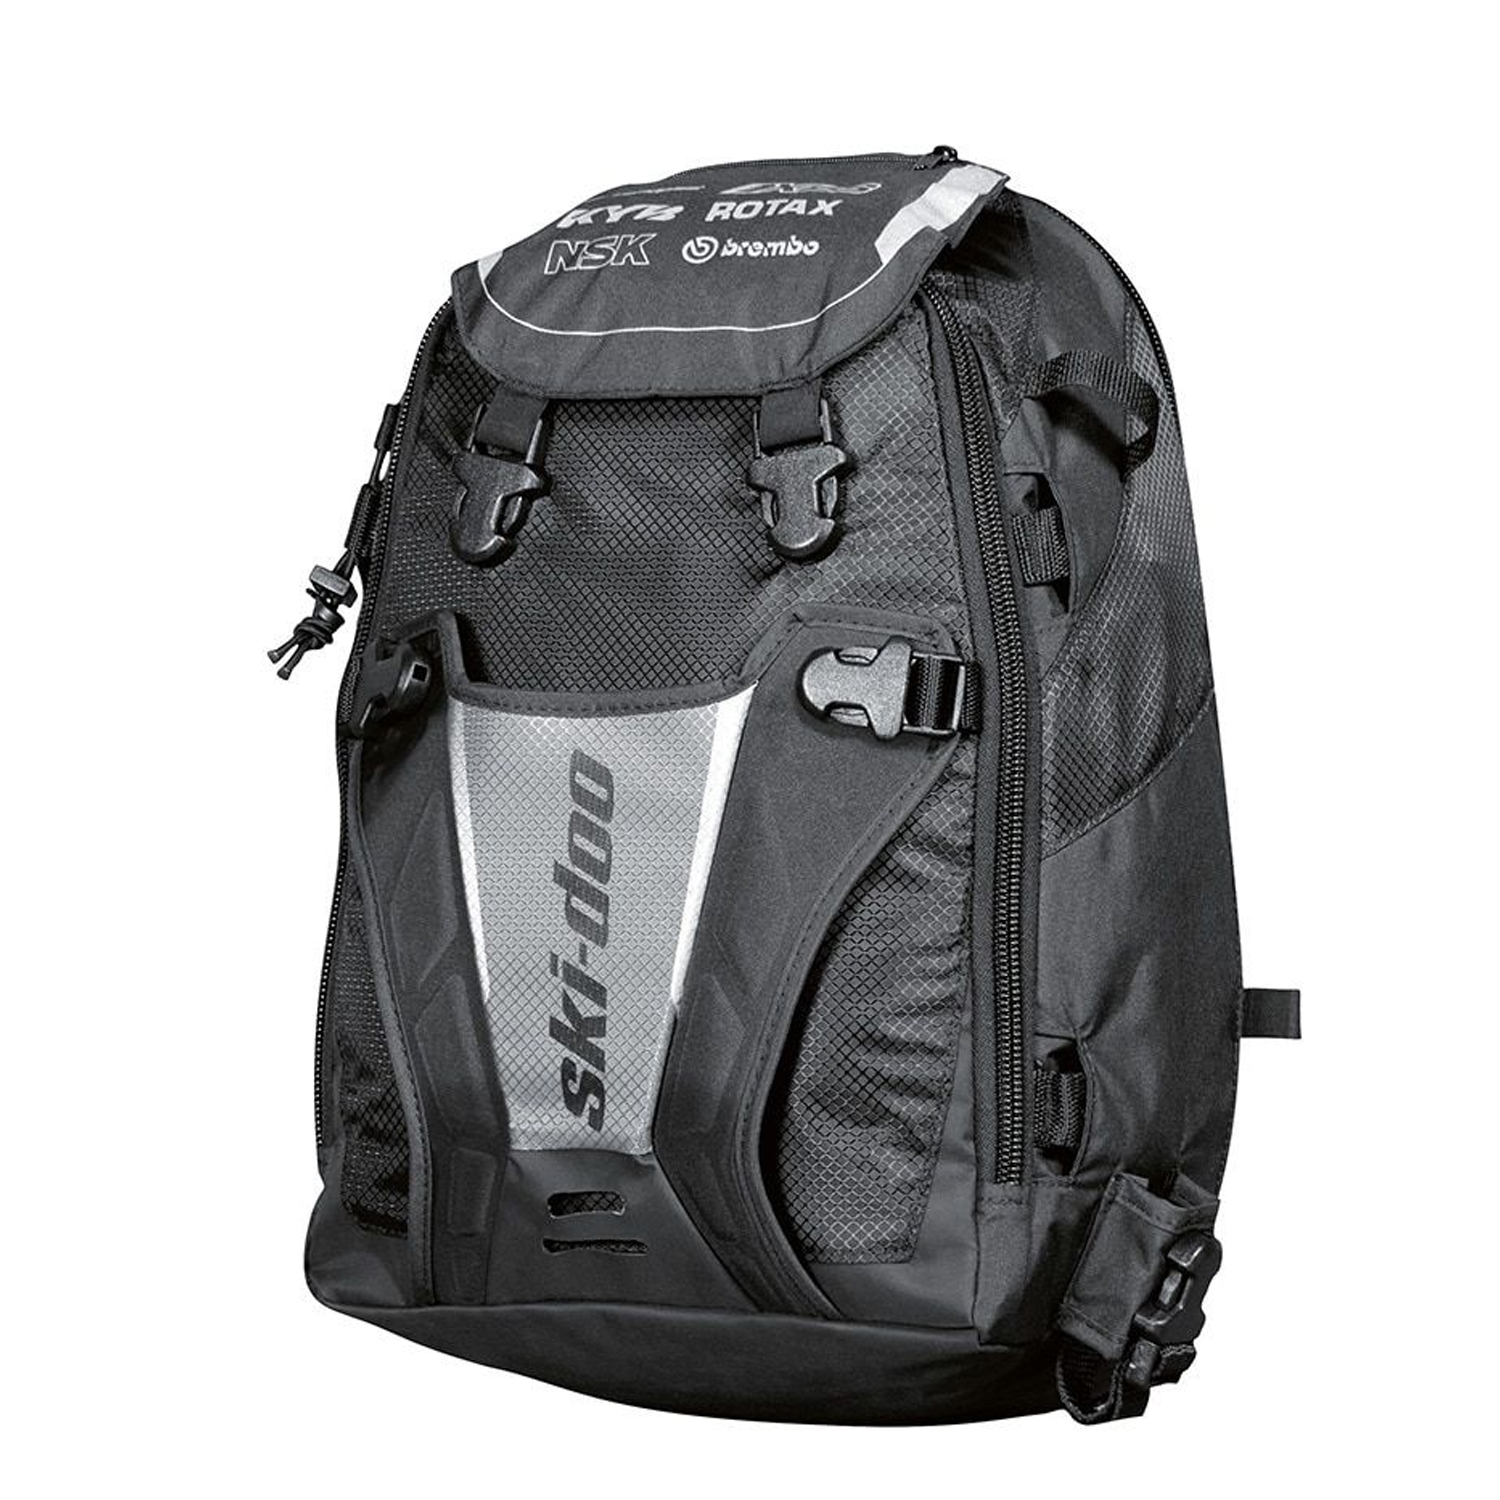 Ski-Doo New OEM Branded 28 Liter Tunnel Backpack With LinQ Soft Strap, 860200939 - image 1 of 2